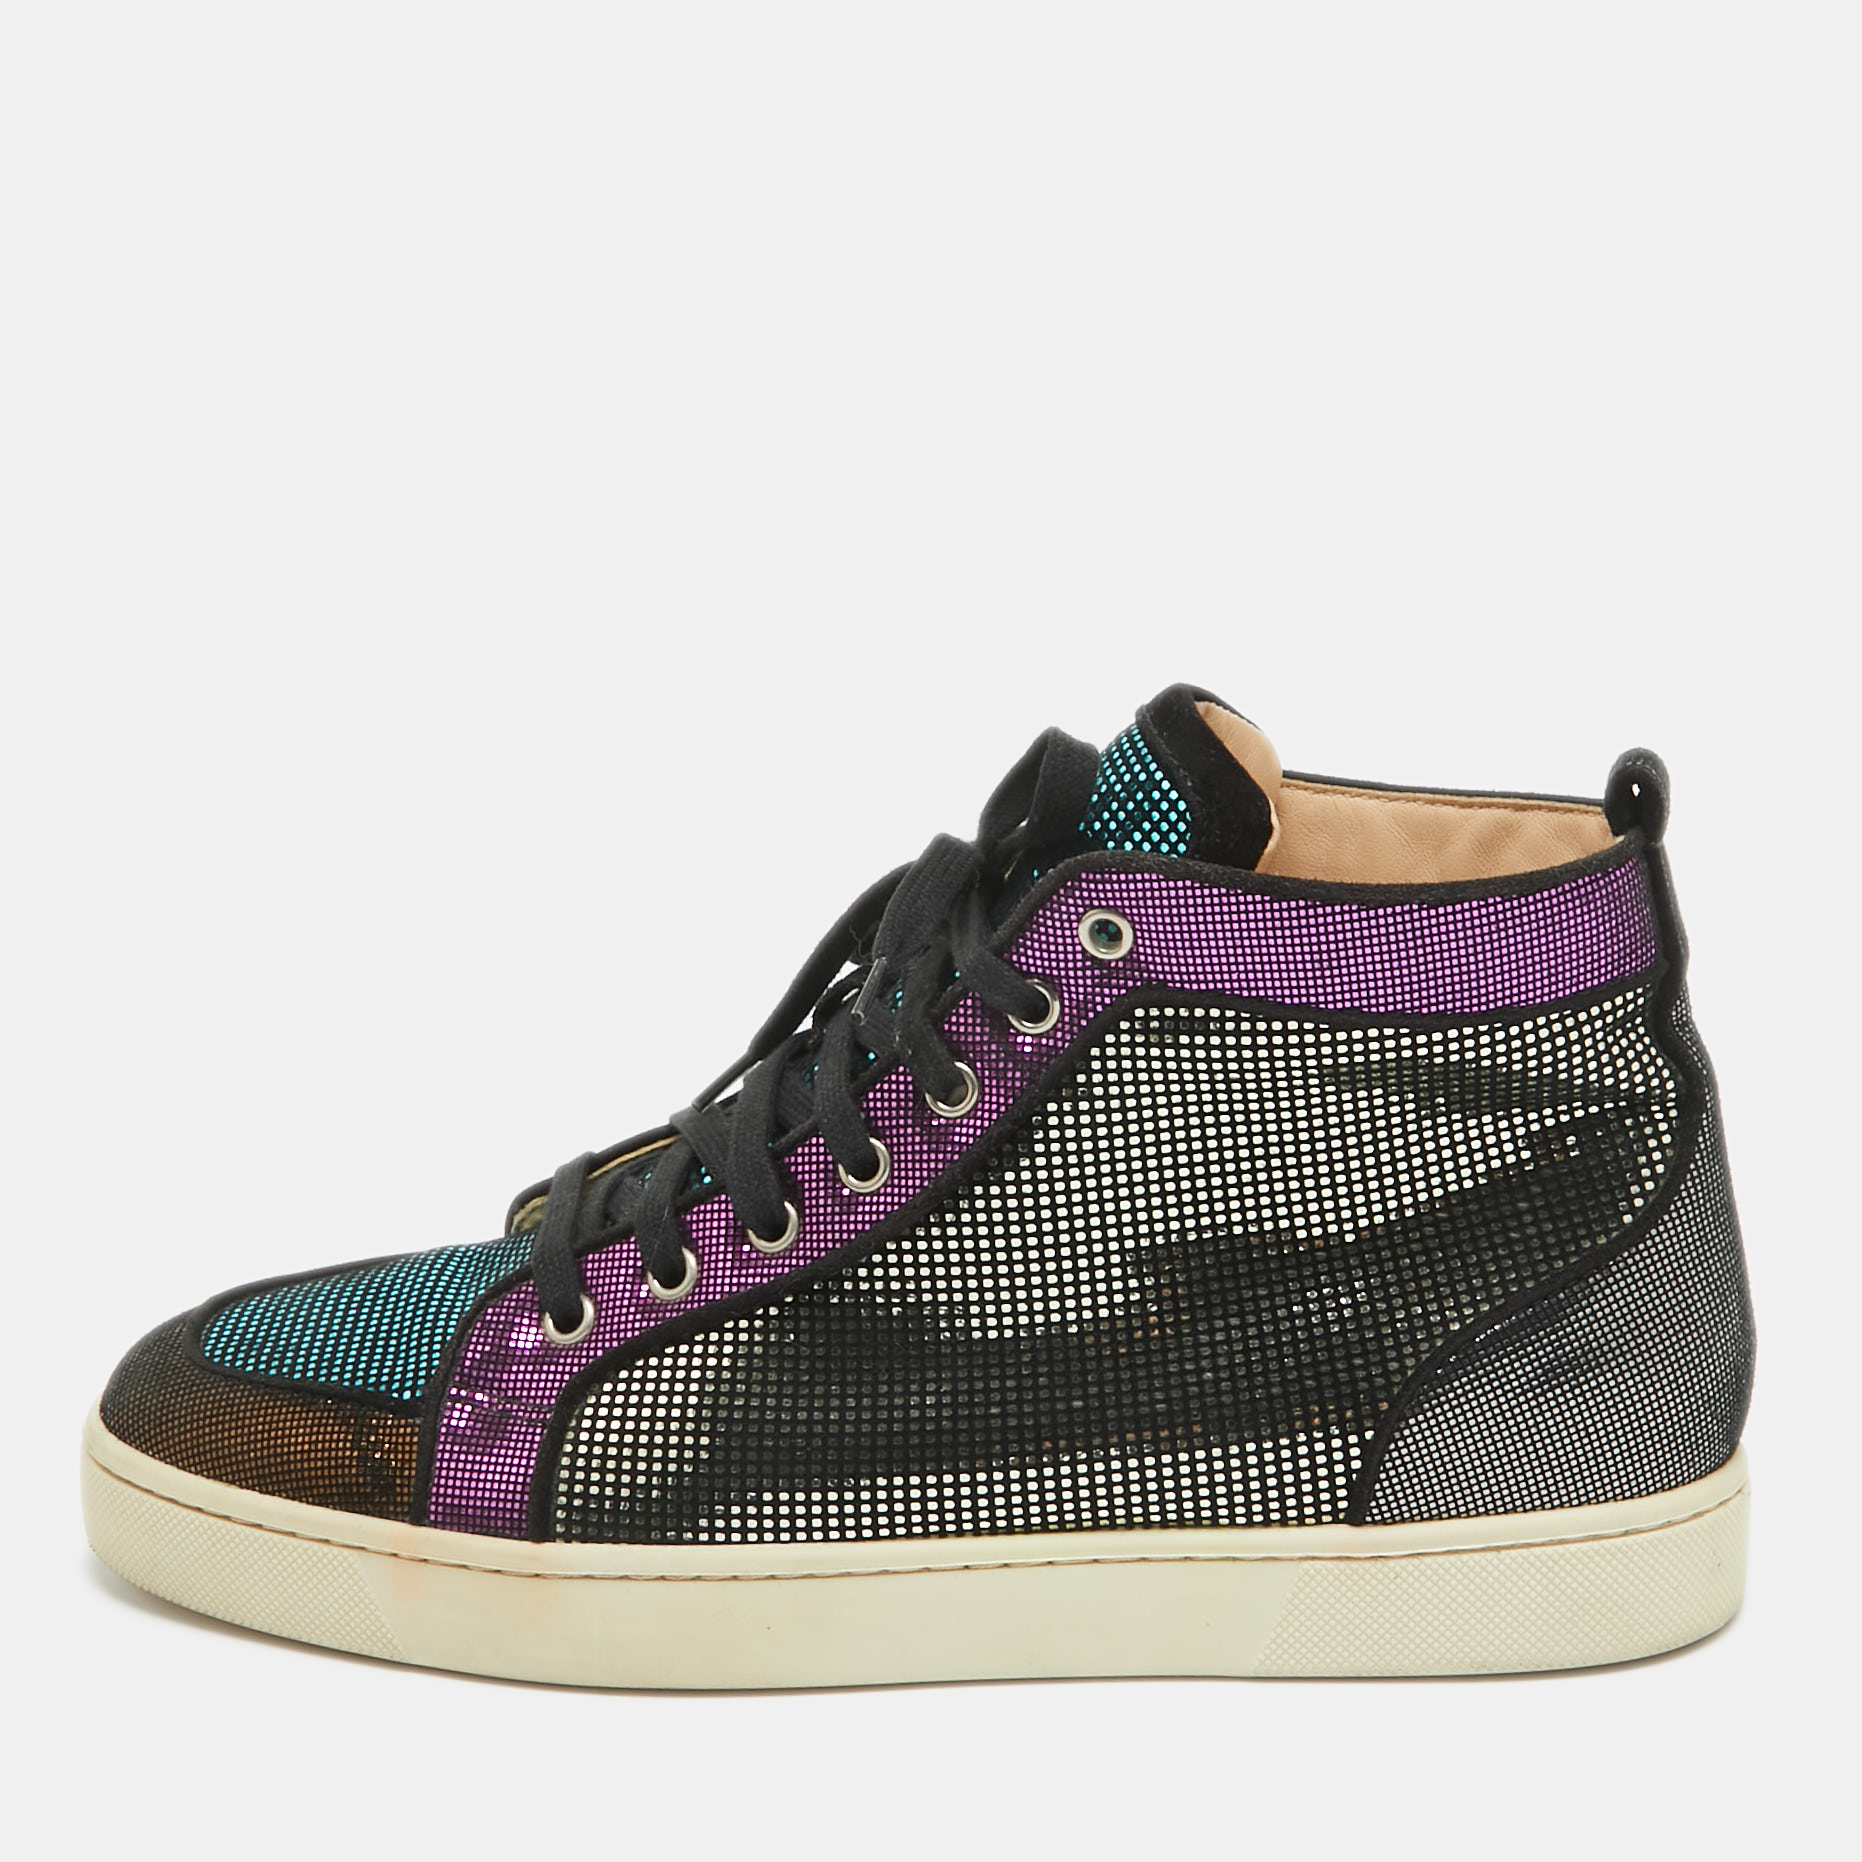 Pre-owned Christian Louboutin Multicolor Suede Colourblock Pattern High Top Trainers Size 42